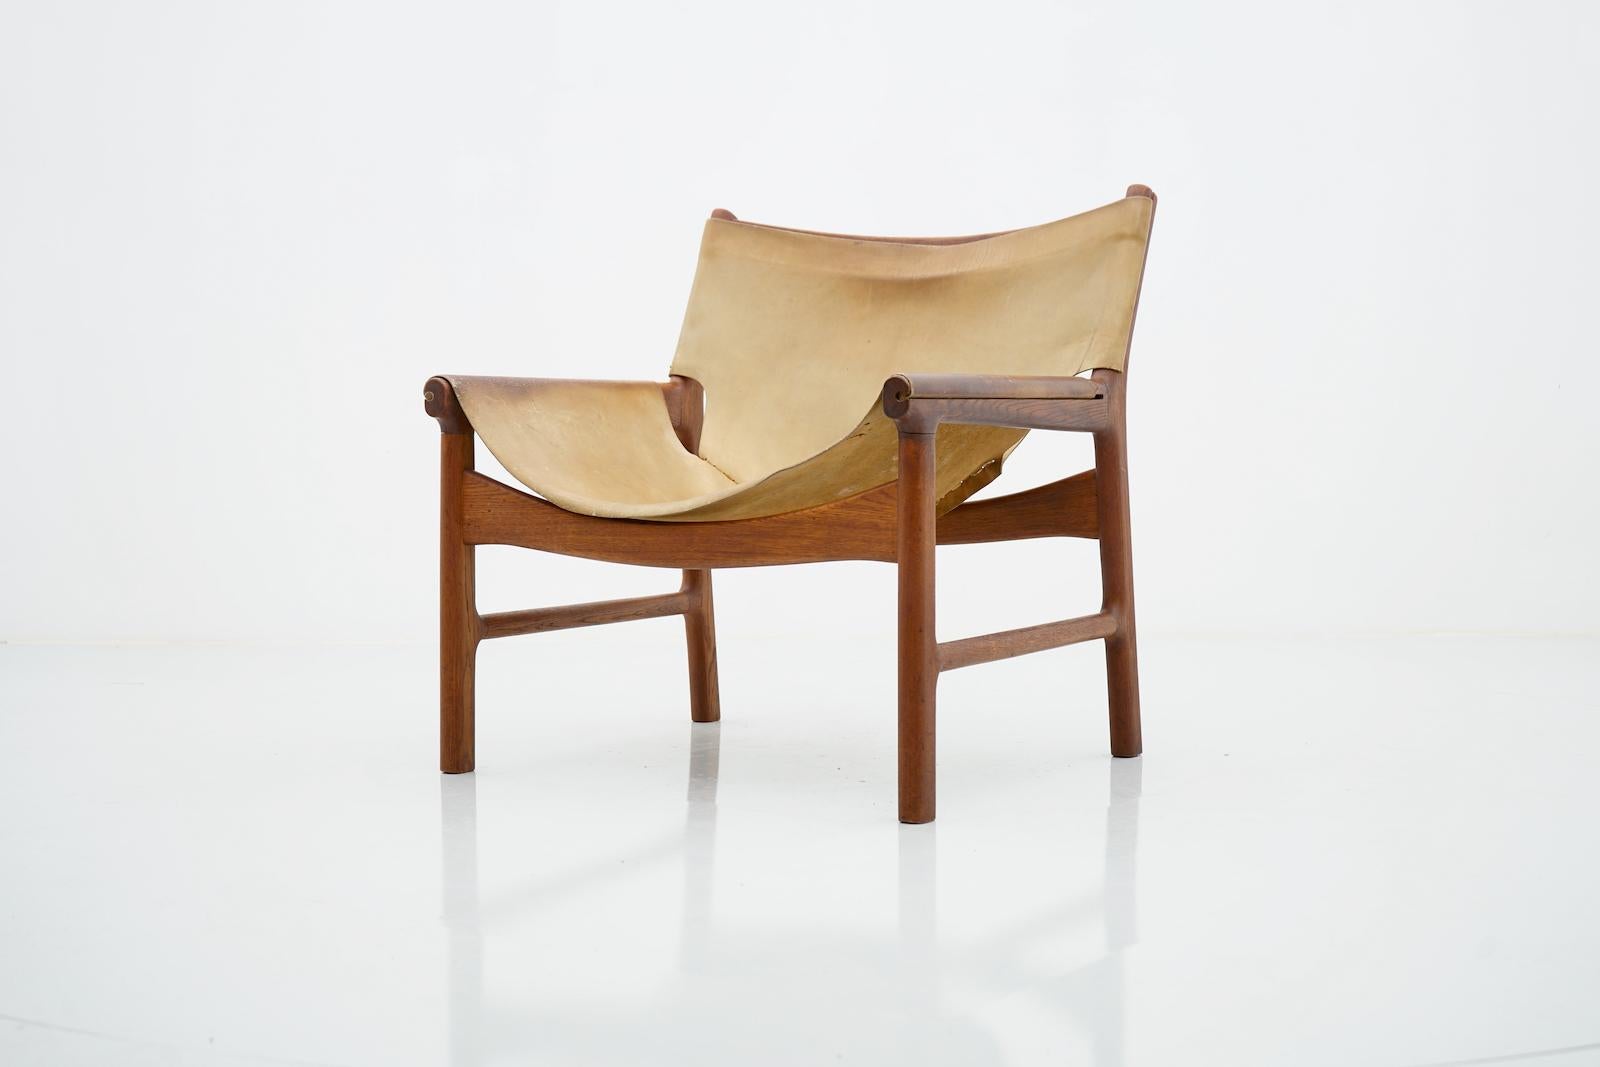 One of three rare Easy Chairs by Illum Wikkelsoe for Michael Laursen, Denmark, 1959.
The chairs are made of Teak wood and light brown leather
The condition is good with signs of use and beautiful patina.
Dimensions: B 70 cm, H 73 cm, T 65